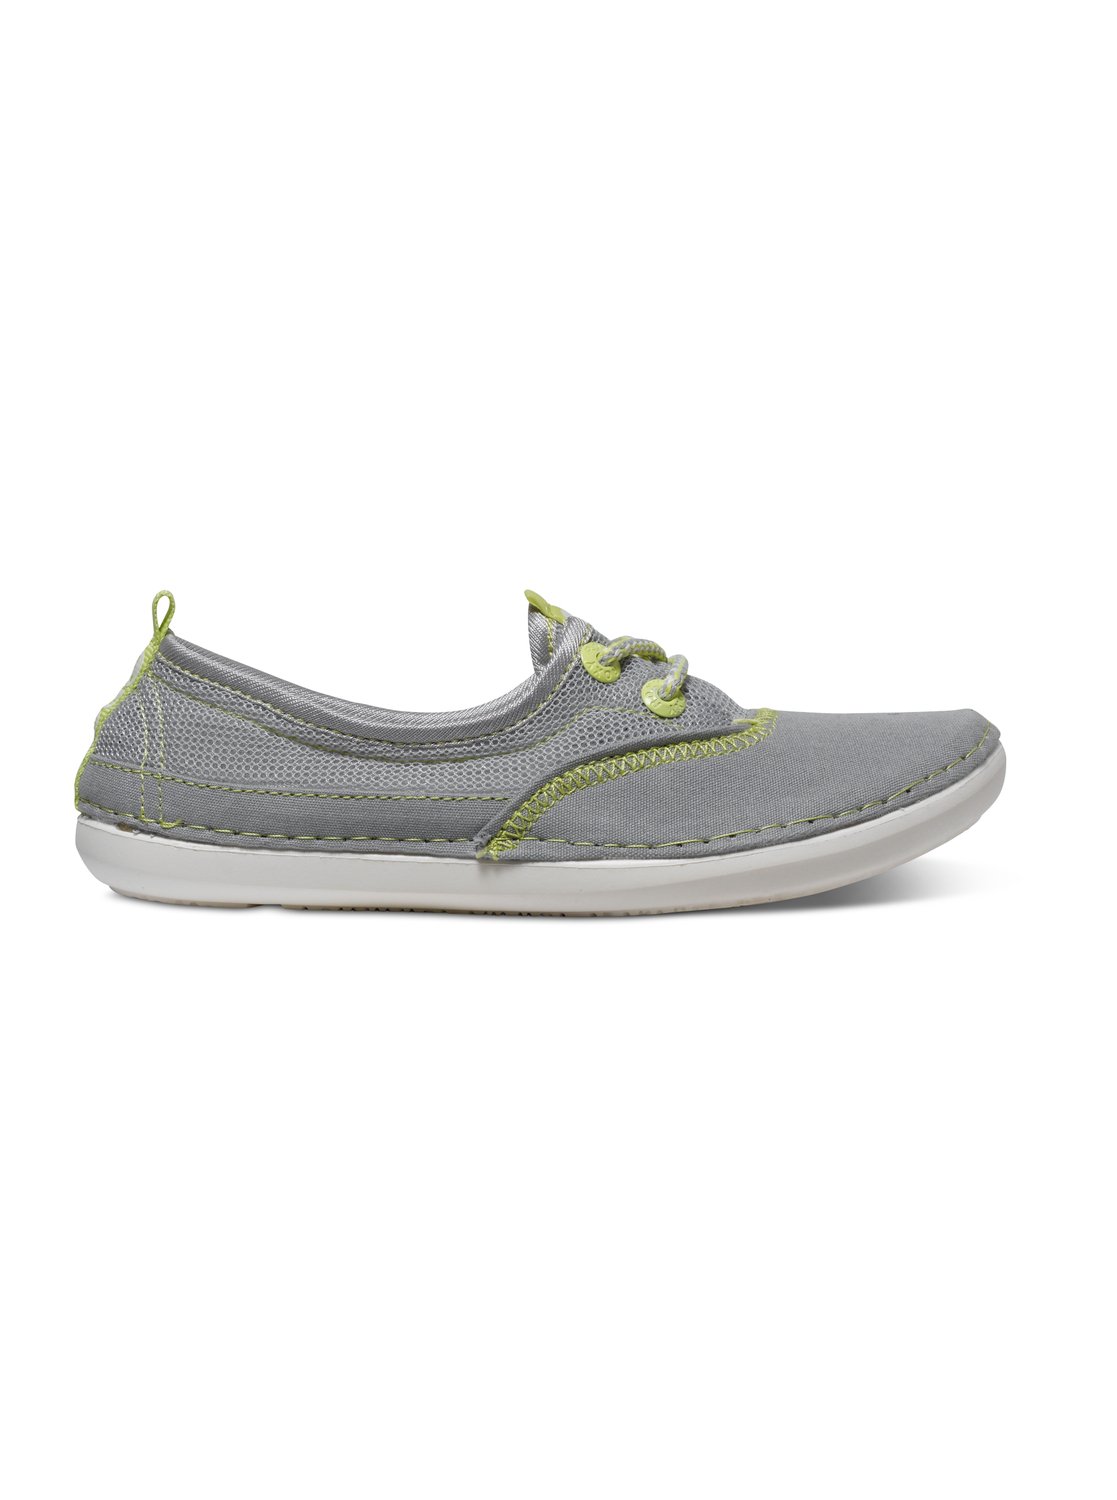 Cruise Shoes ARJS600312 | Roxy